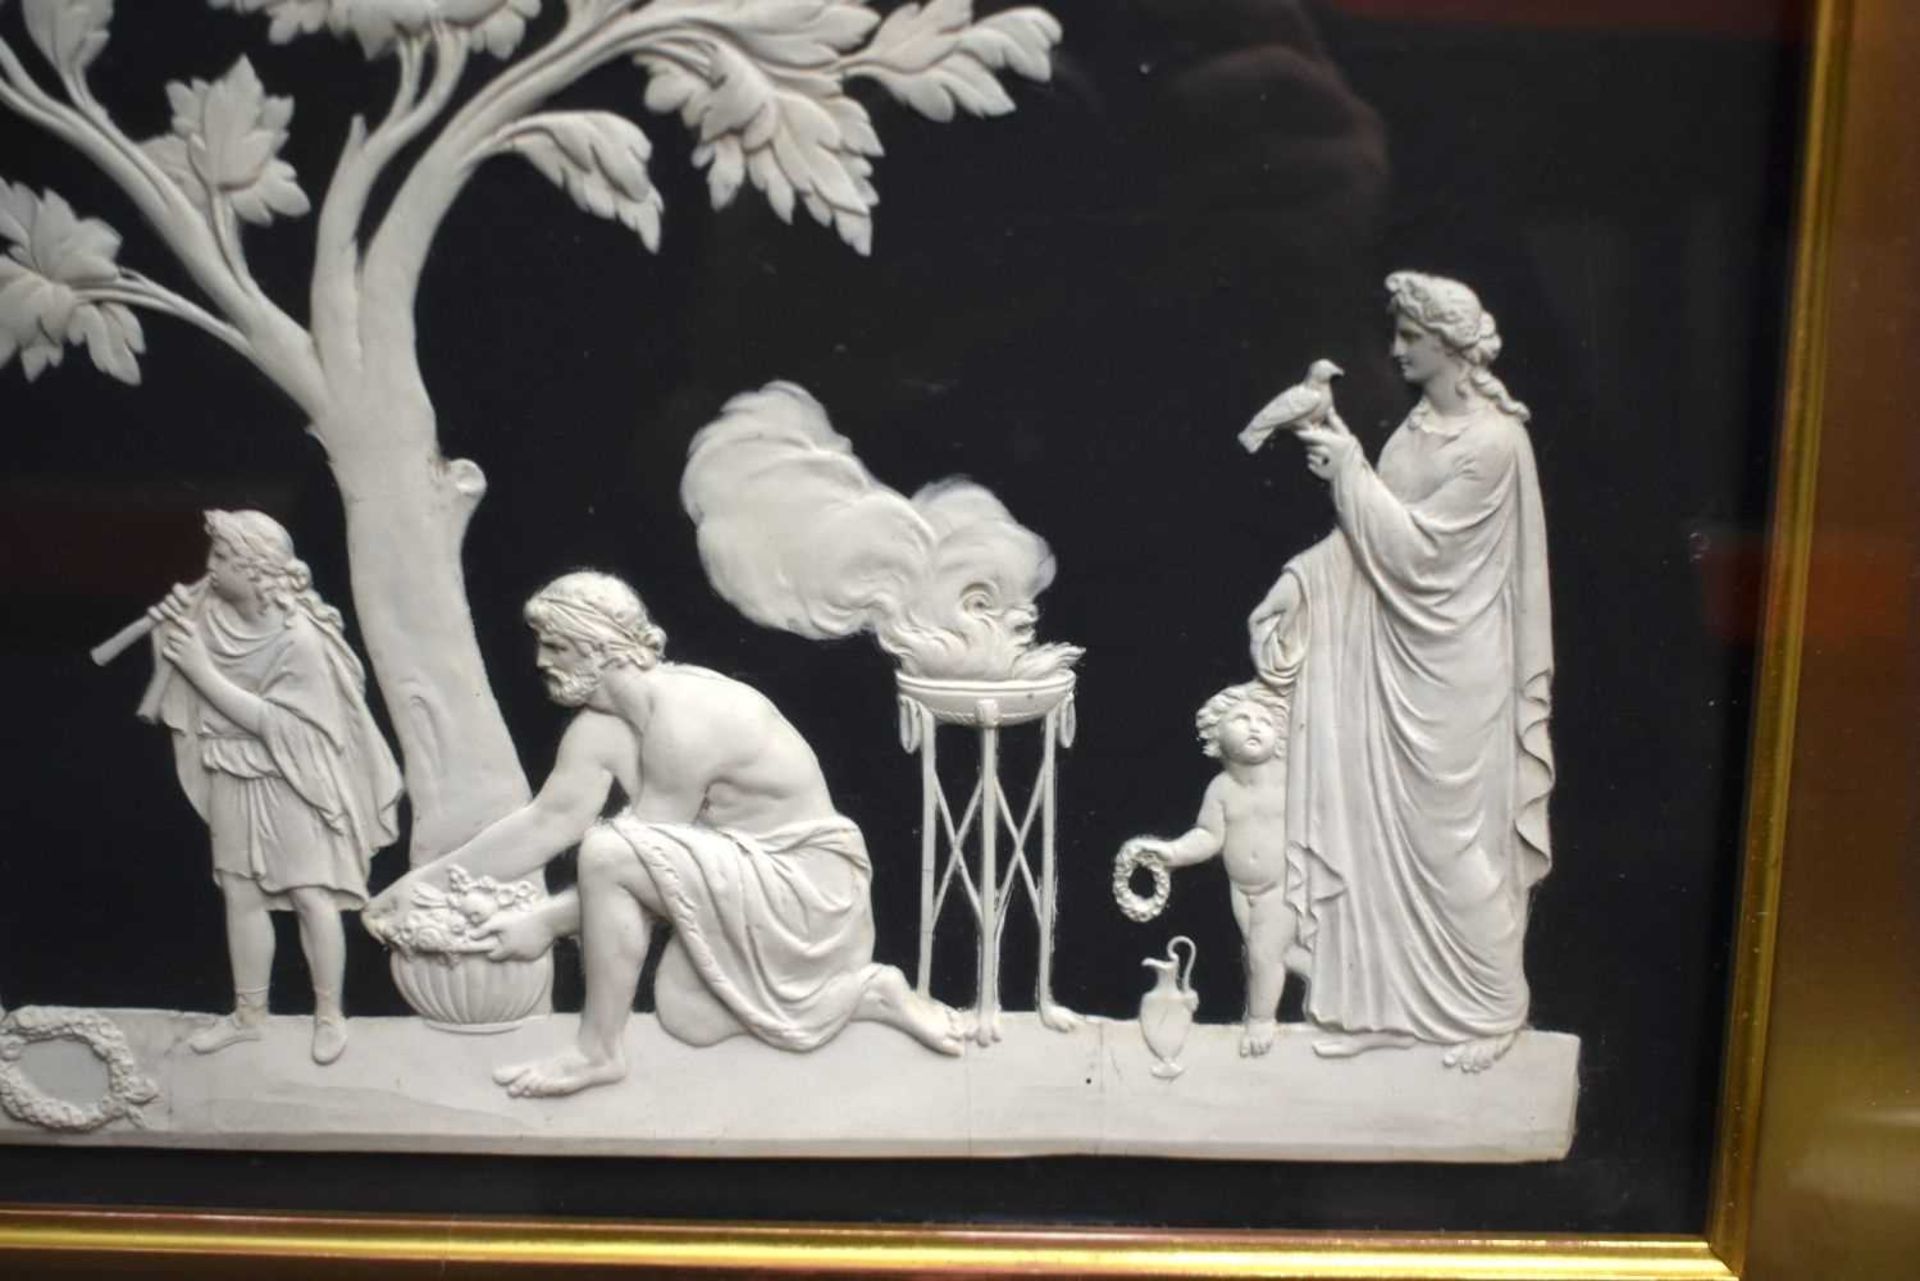 A RARE AND LARGE 19TH CENTURY WEDGWOOD BLACK BASALT PLAQUE depicting classical scenes of figures - Image 5 of 6